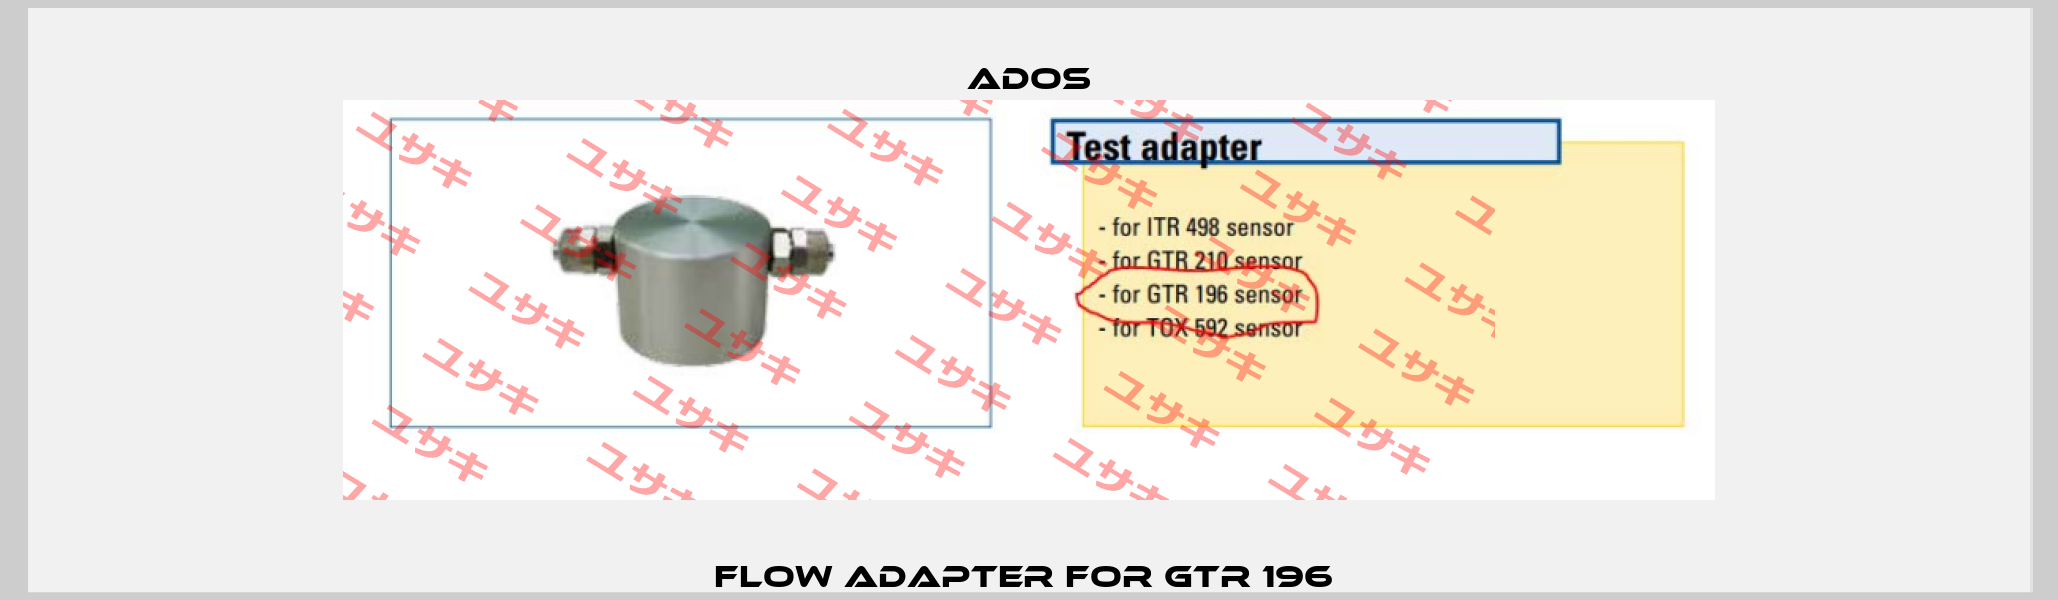 Flow adapter for GTR 196  Ados